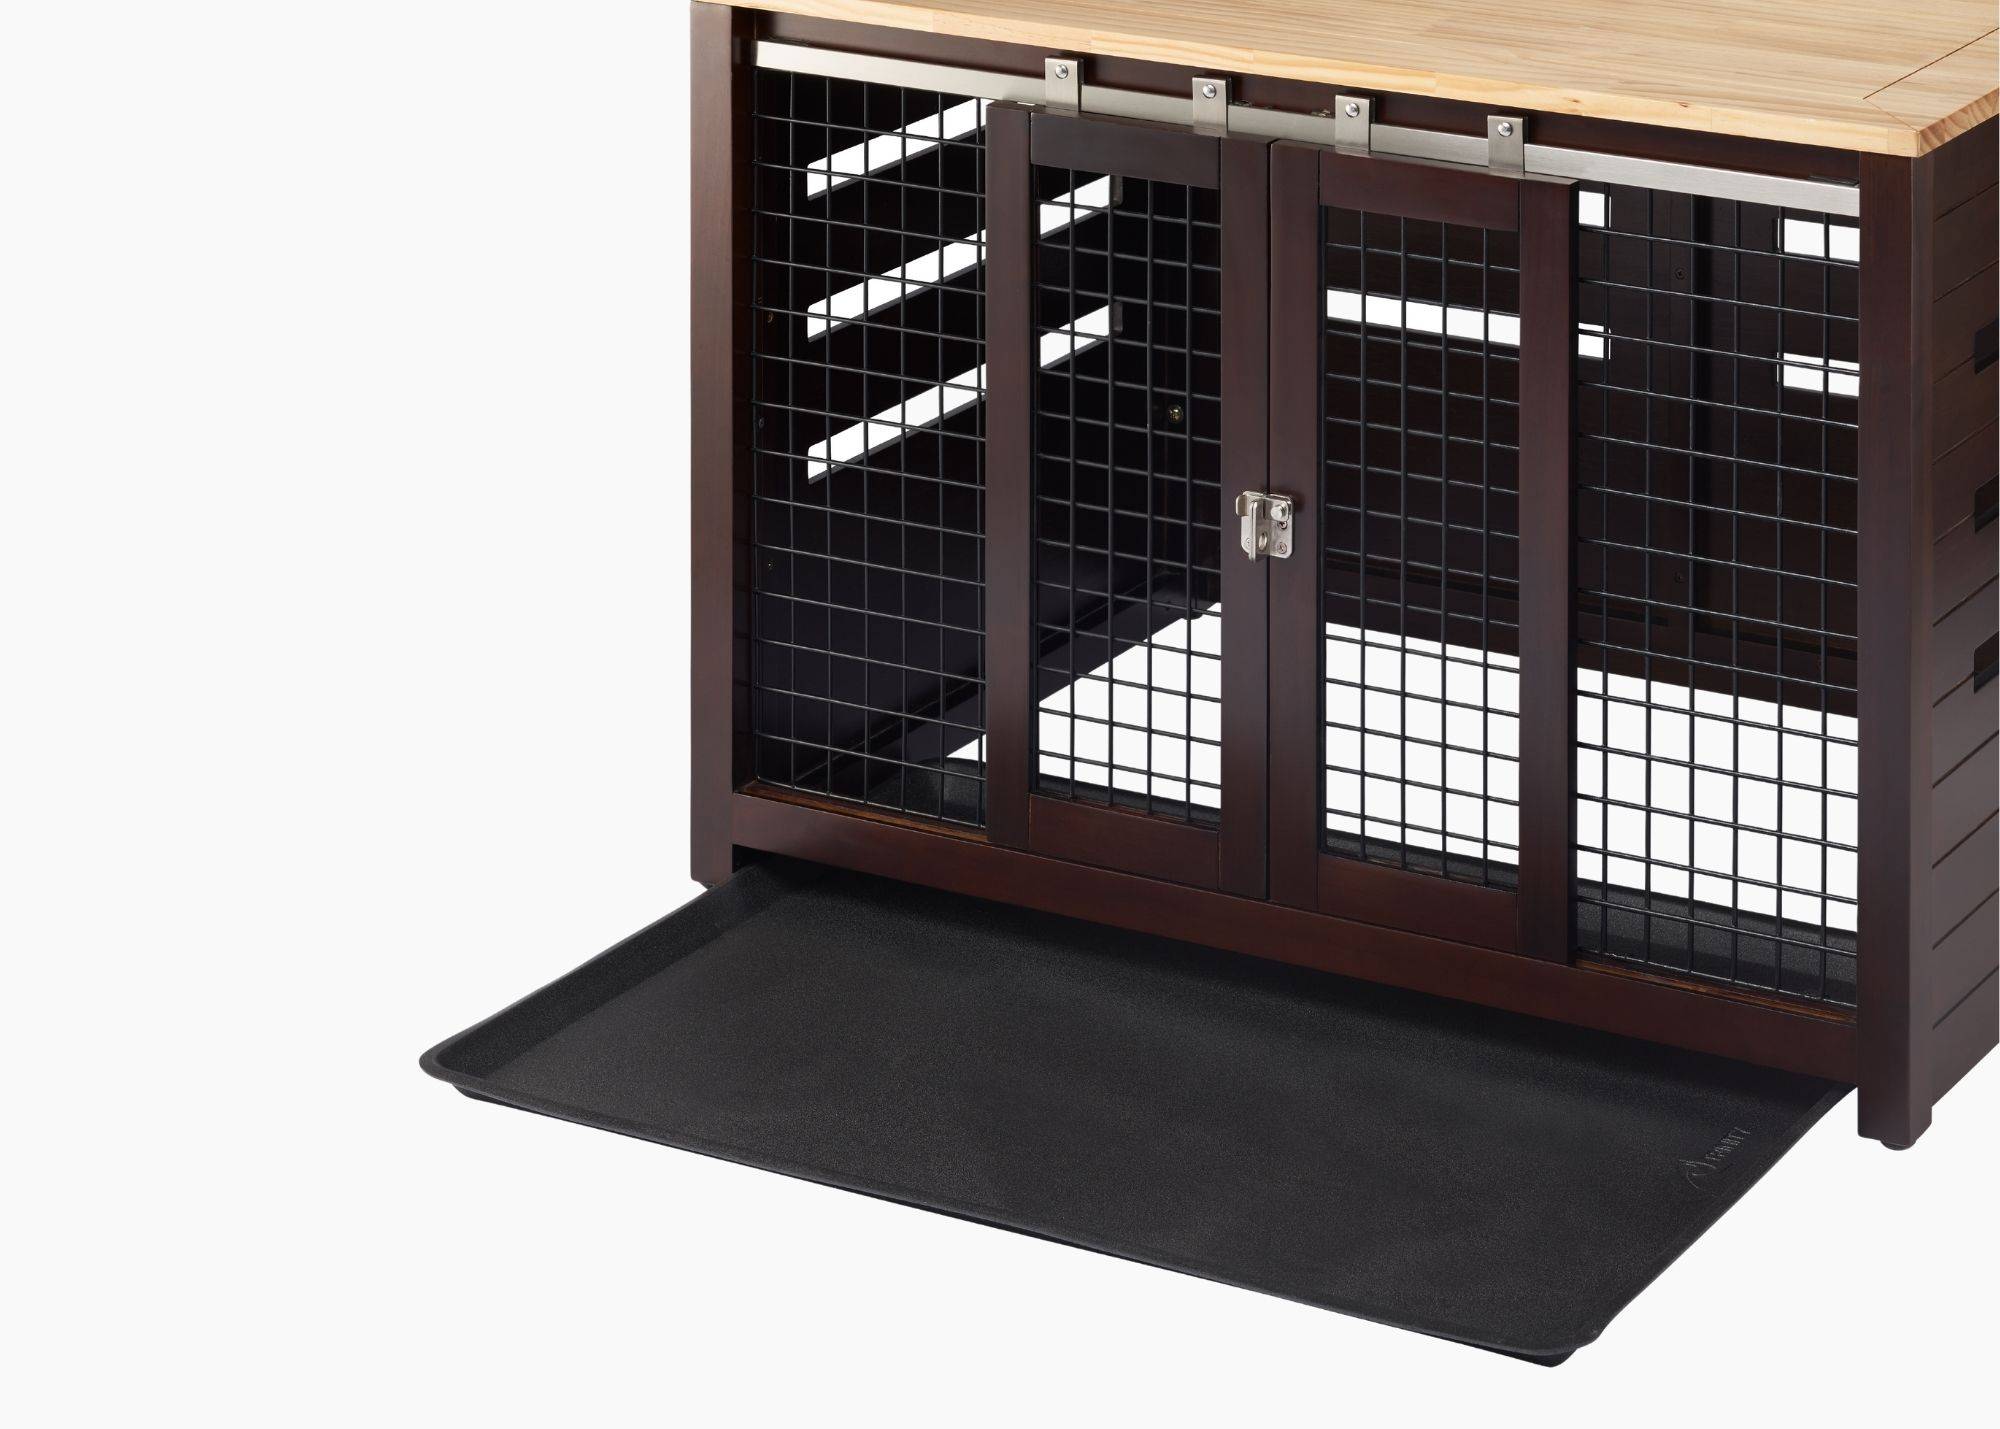 sliding tray underneath the pet crate